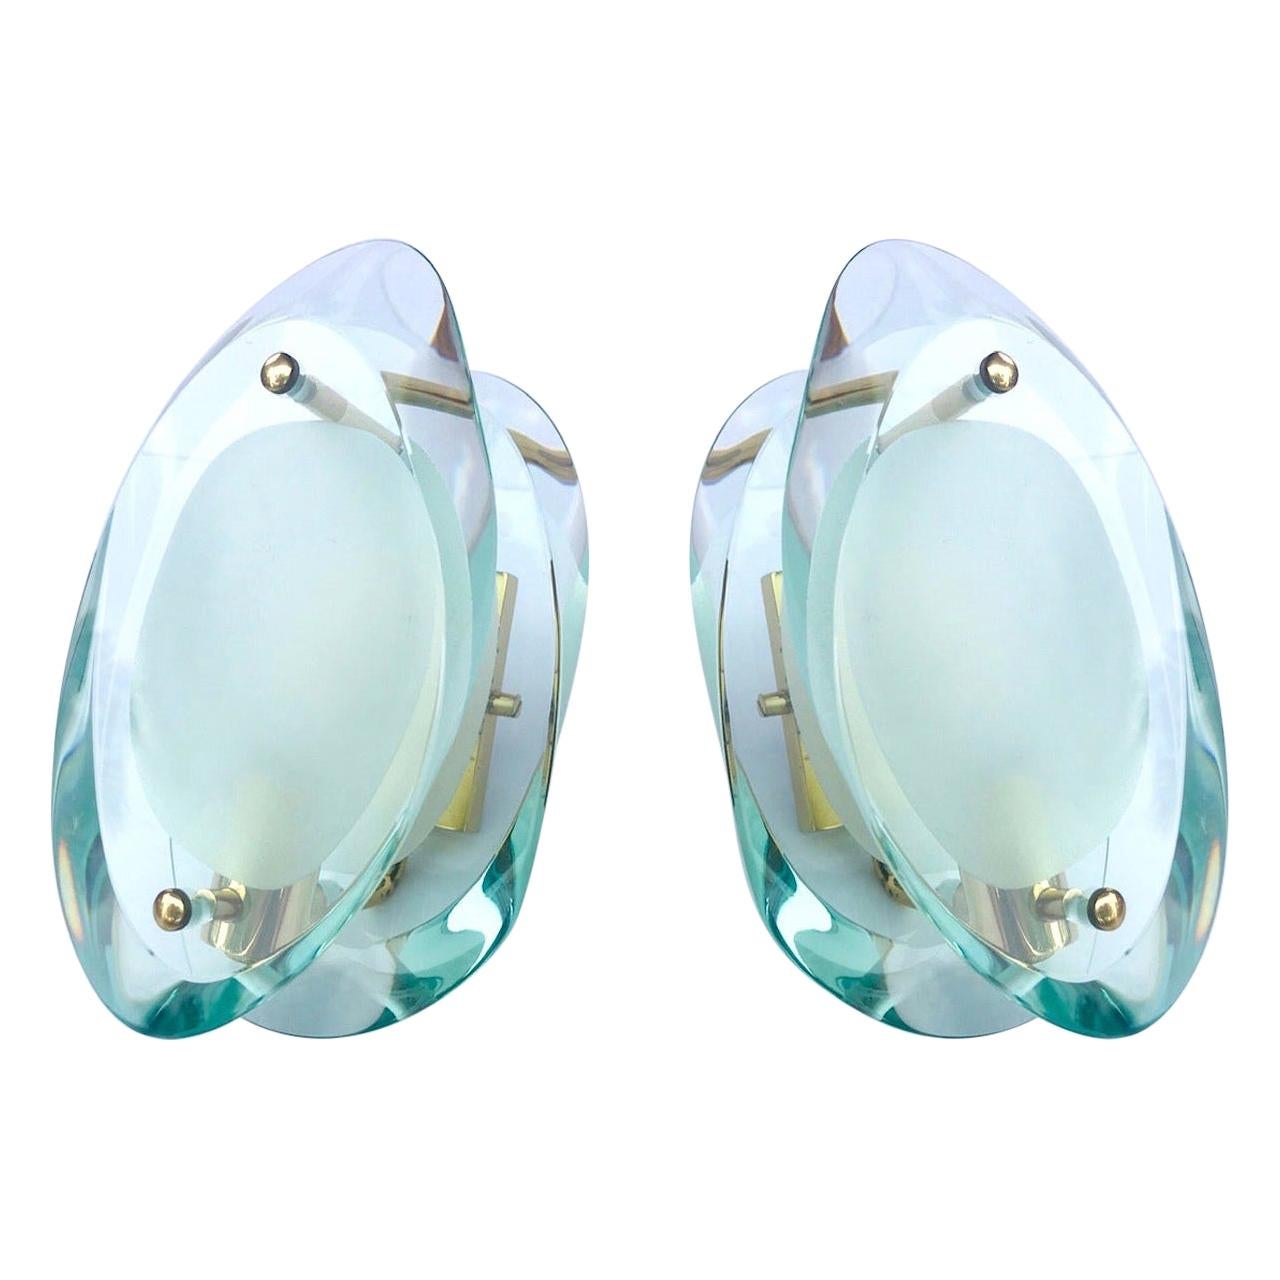 Pair of Glass Sconces by Max Ingrand for Fontana Arte, Italy, circa 1960s